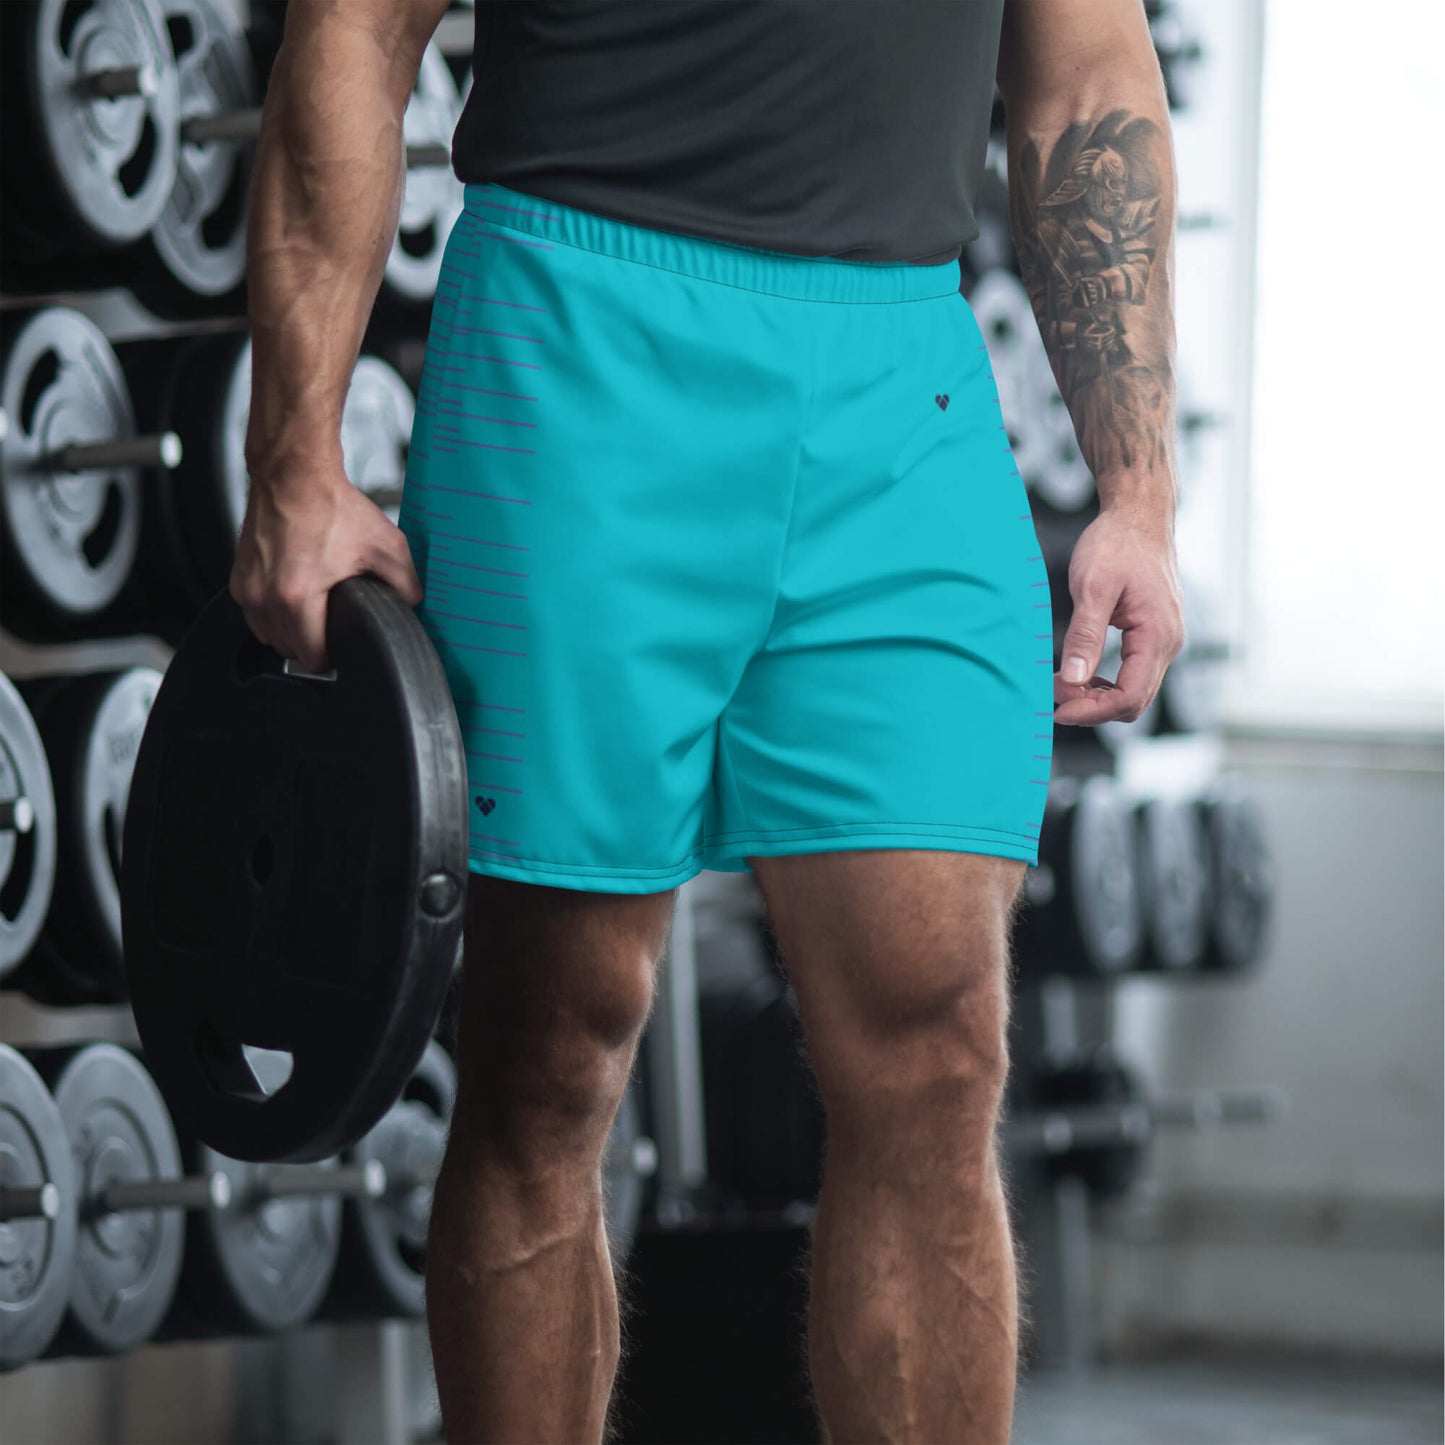 Empowering men's sport shorts in turquoise and periwinkle stripes